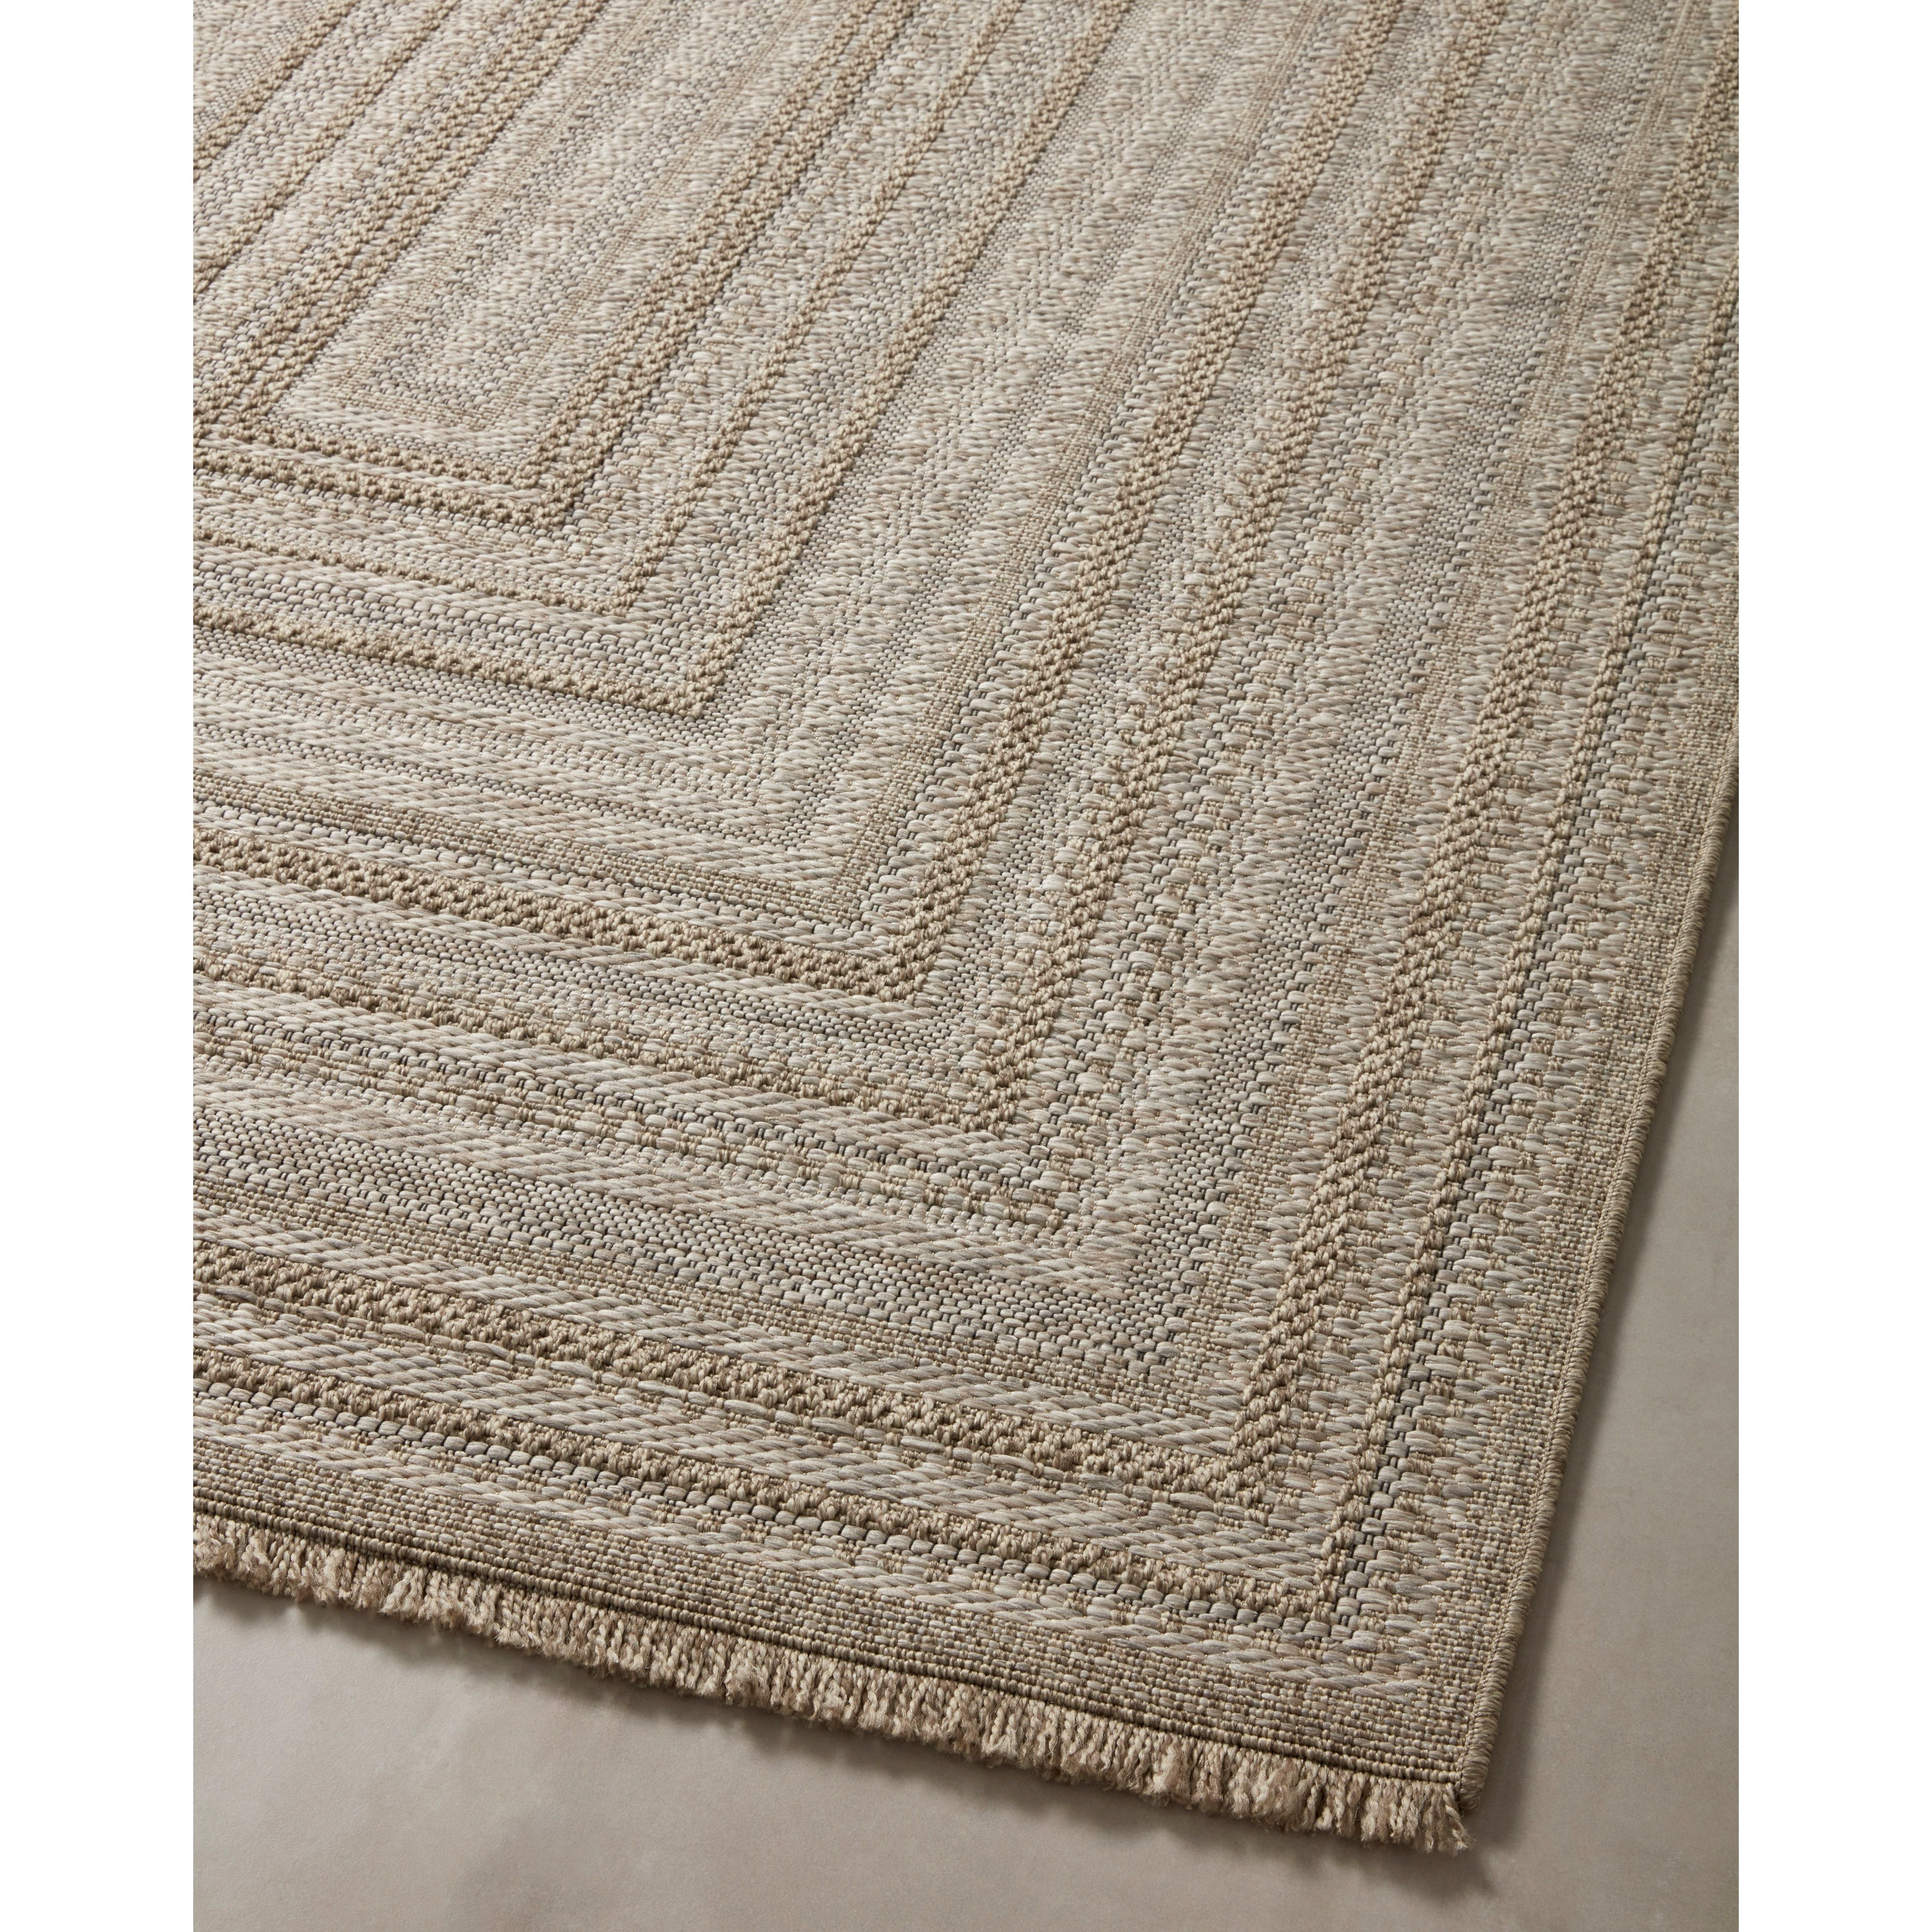 Made for sunny days ahead, the Dawn Natural DAW-01 rug is an indoor/outdoor rug that looks like a woven sisal rug but is power-loomed of 100% polypropylene, which makes it water- and mildew-resistant (so it's ready for rainy days ahead, too). Amethyst Home provides interior design, new home construction design consulting, vintage area rugs, and lighting in the Omaha metro area.